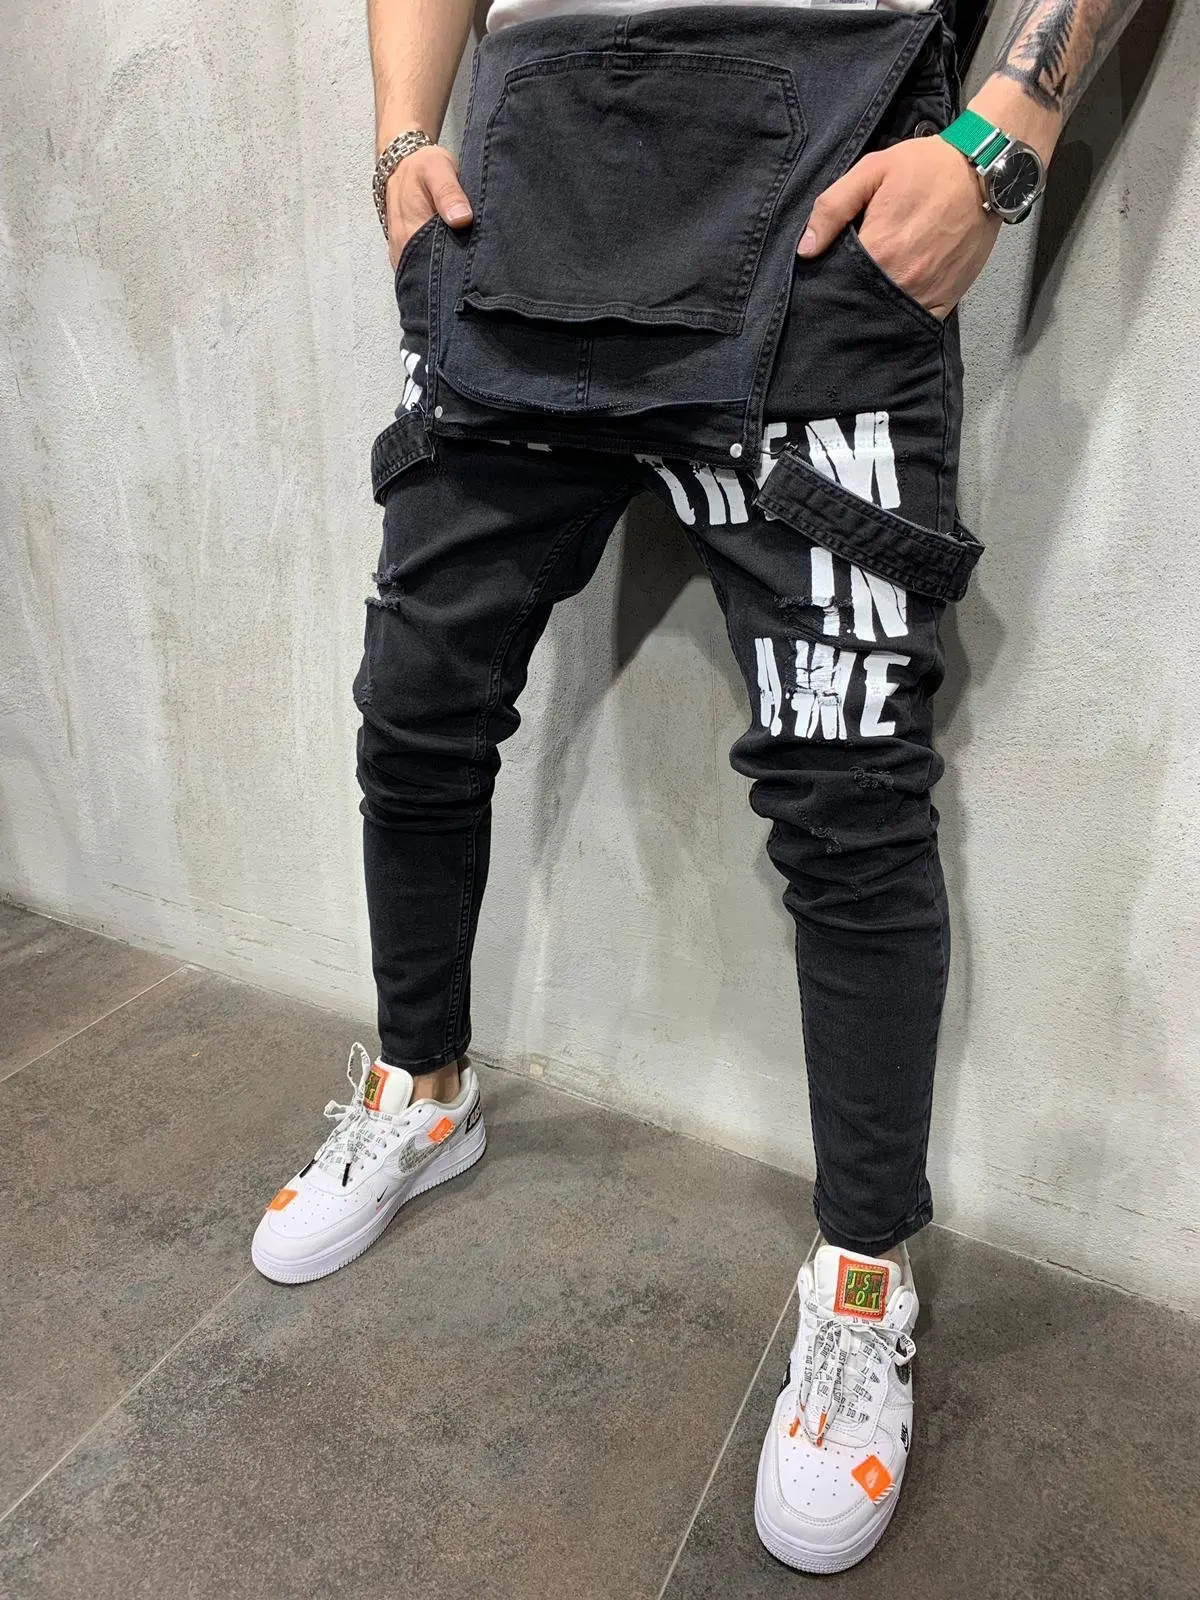 

Overalls Jeans Men Safari Style Letter Print Loose Pencil Pants Ripped Distressed Denim Trousers Full Length Male Clothes 2021